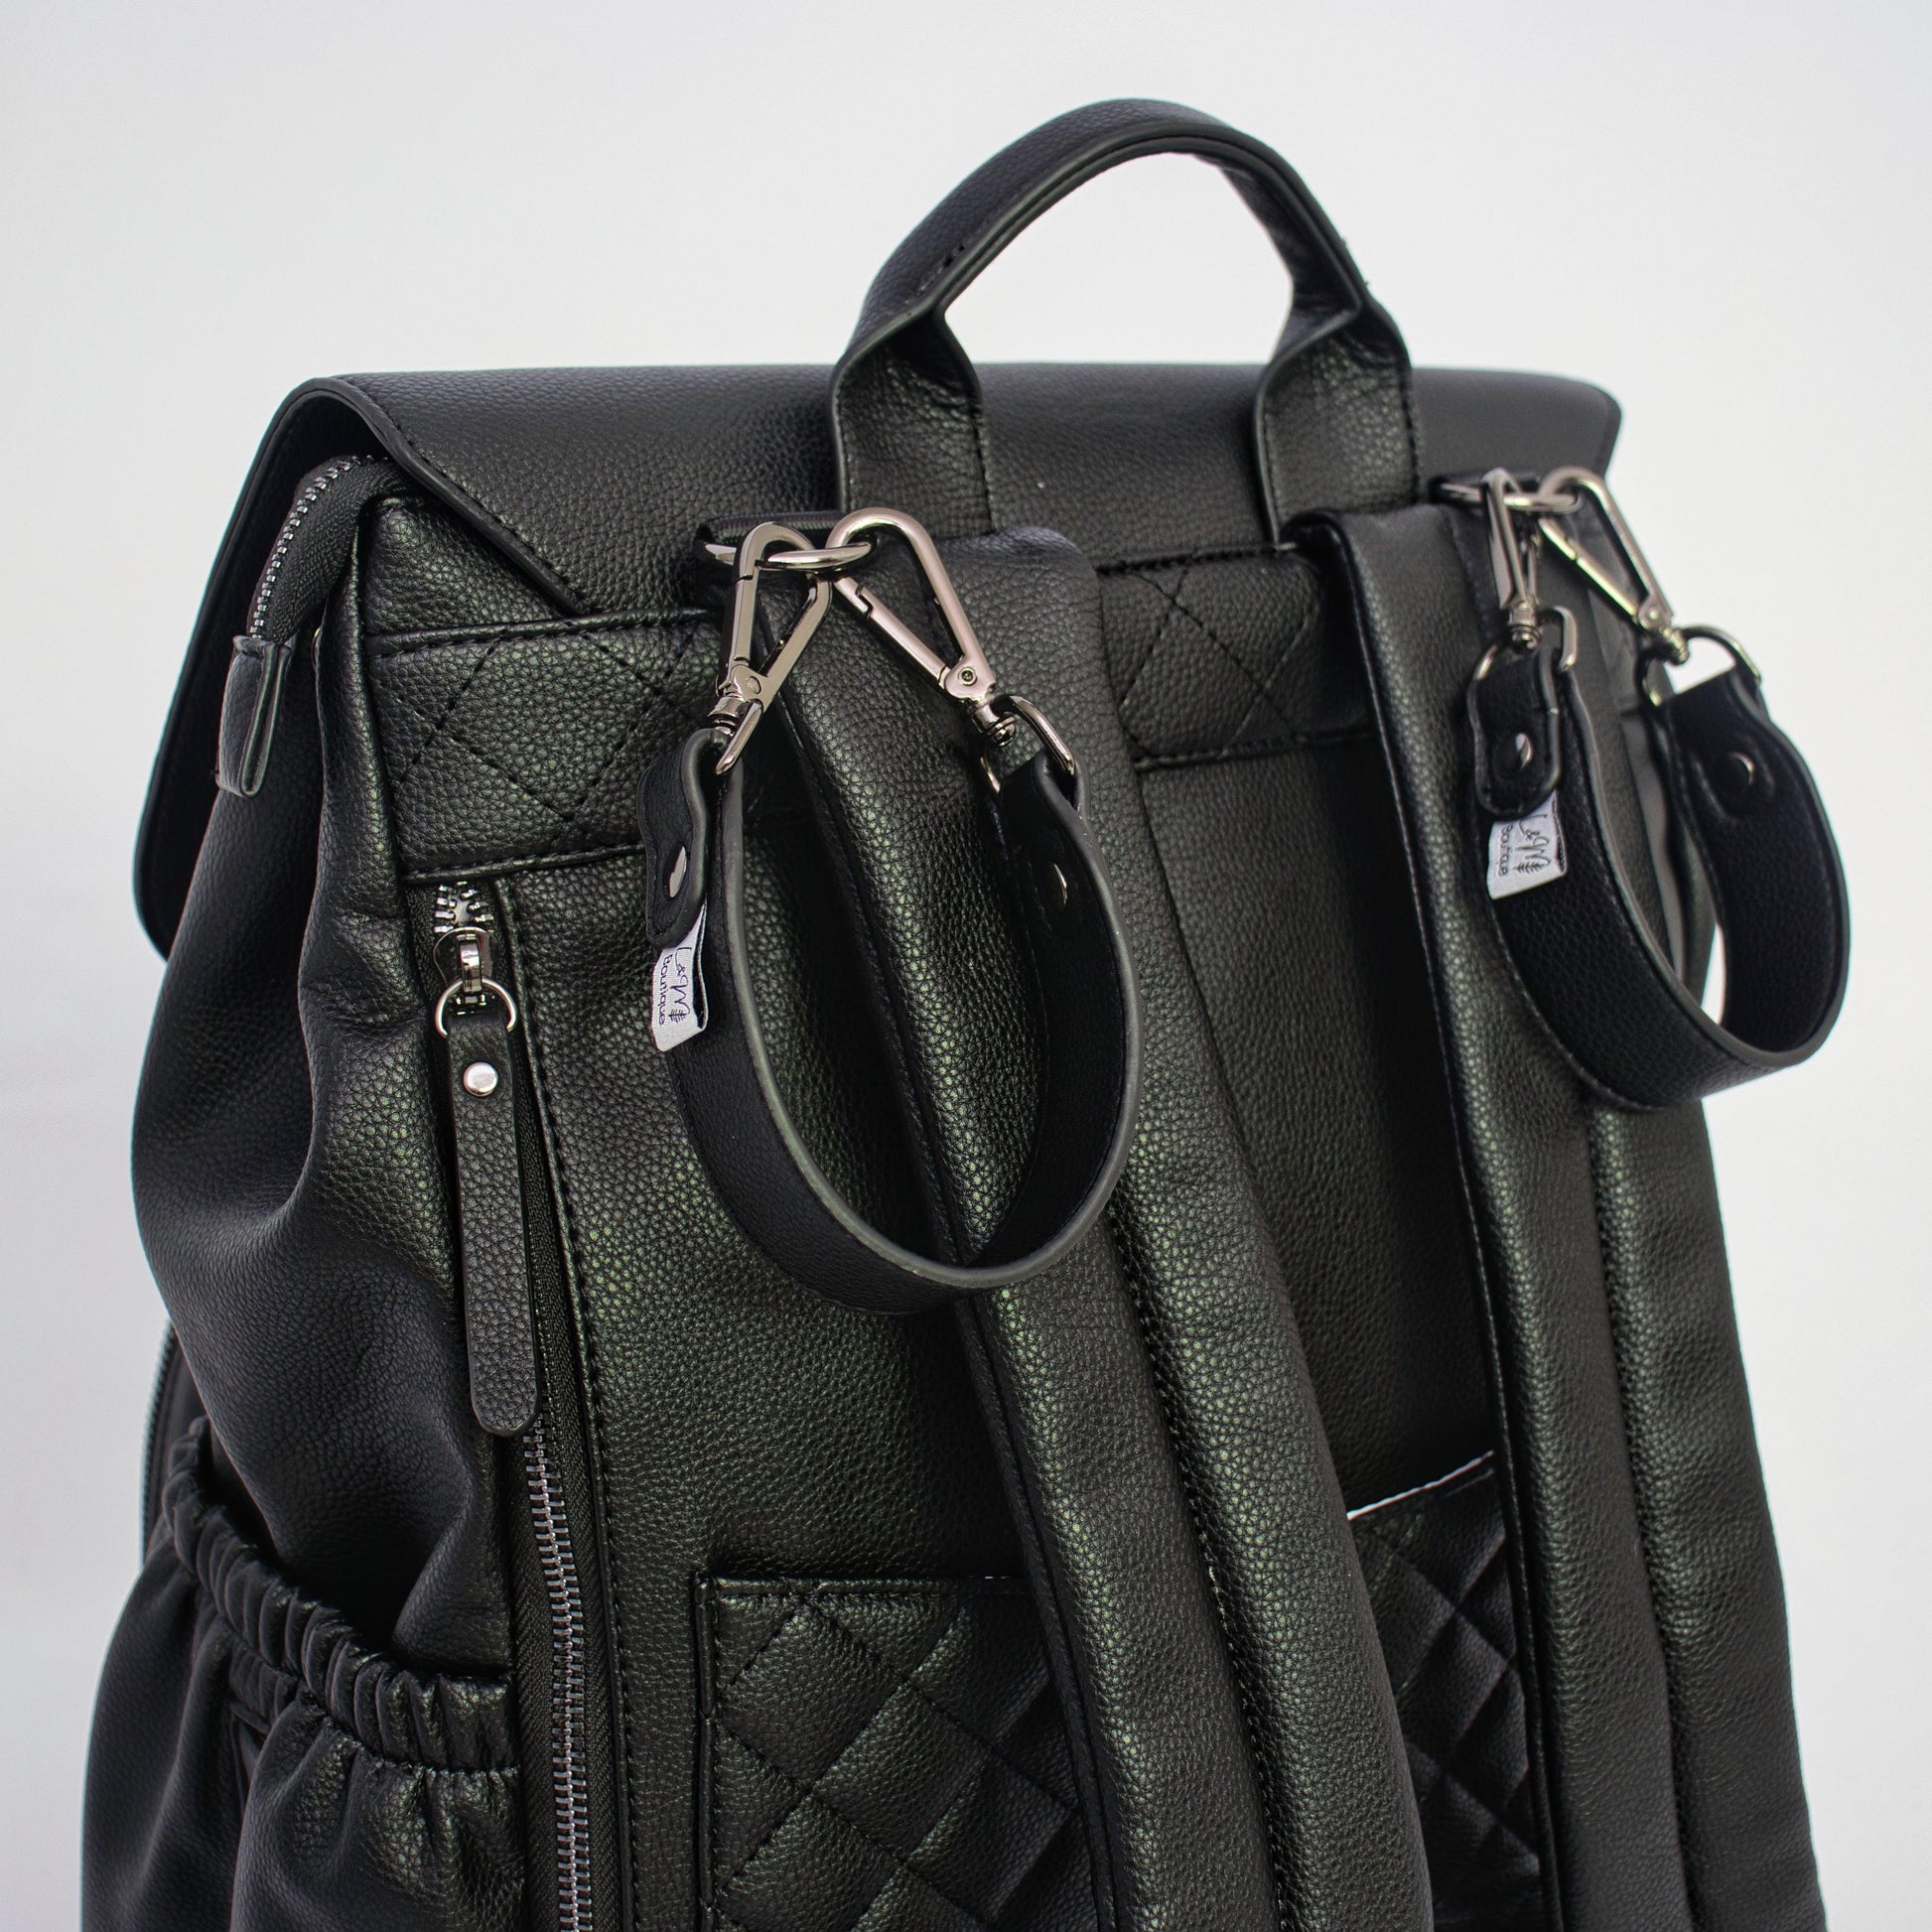 Milana Baby Backpack in Matte Black by L&M Boutique with pram clips for stroller attachment